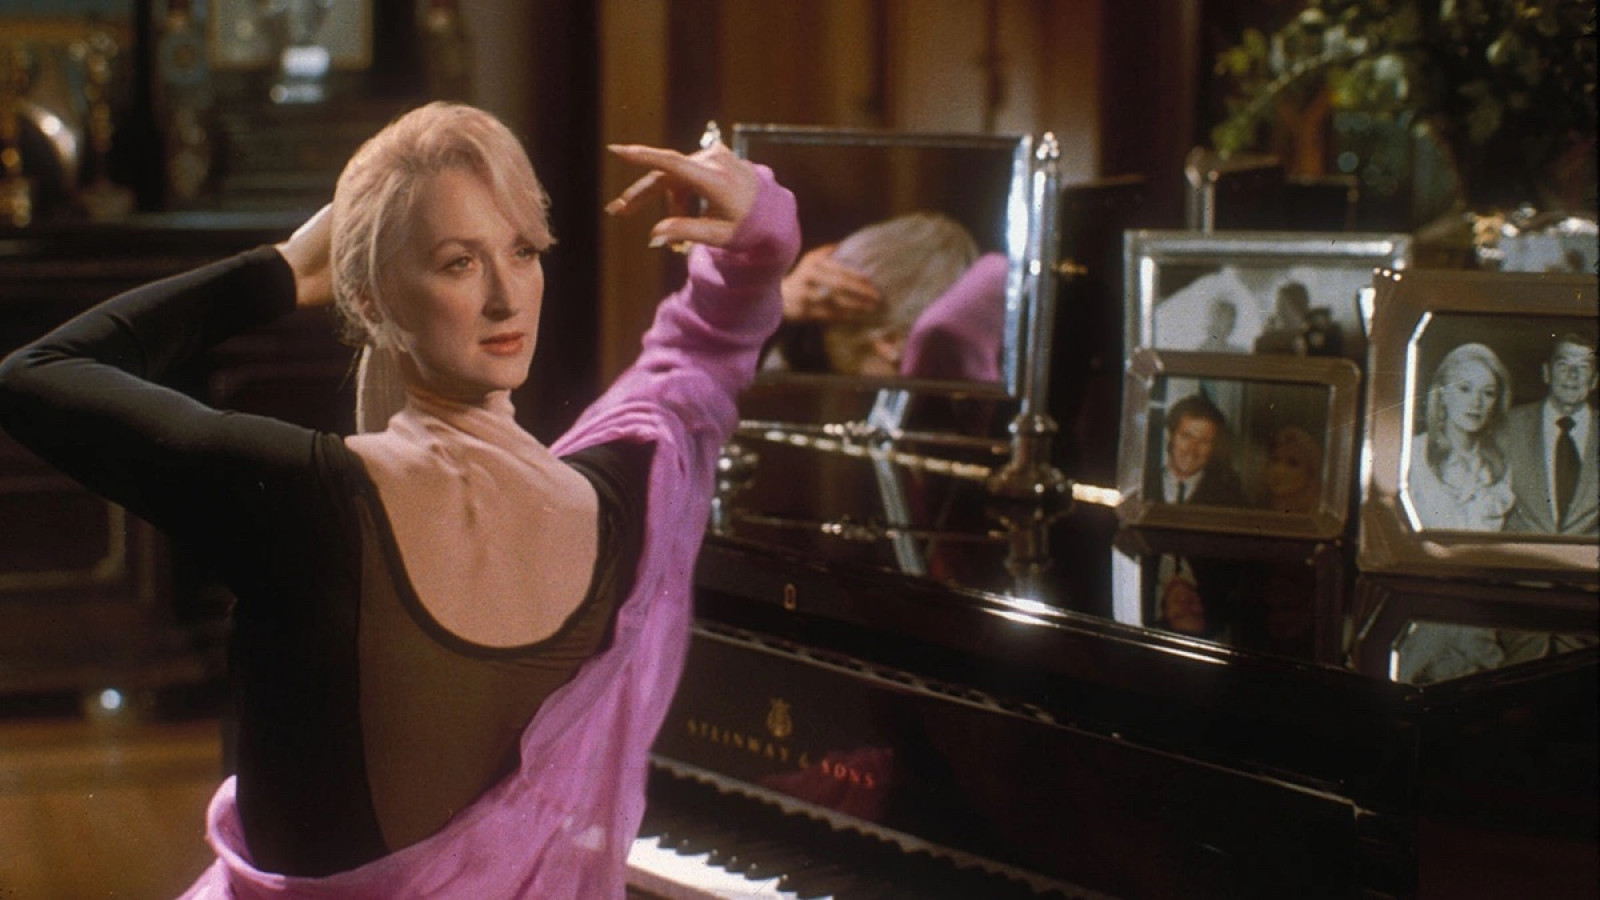 Death Becomes Her, by Robert Zemeckis